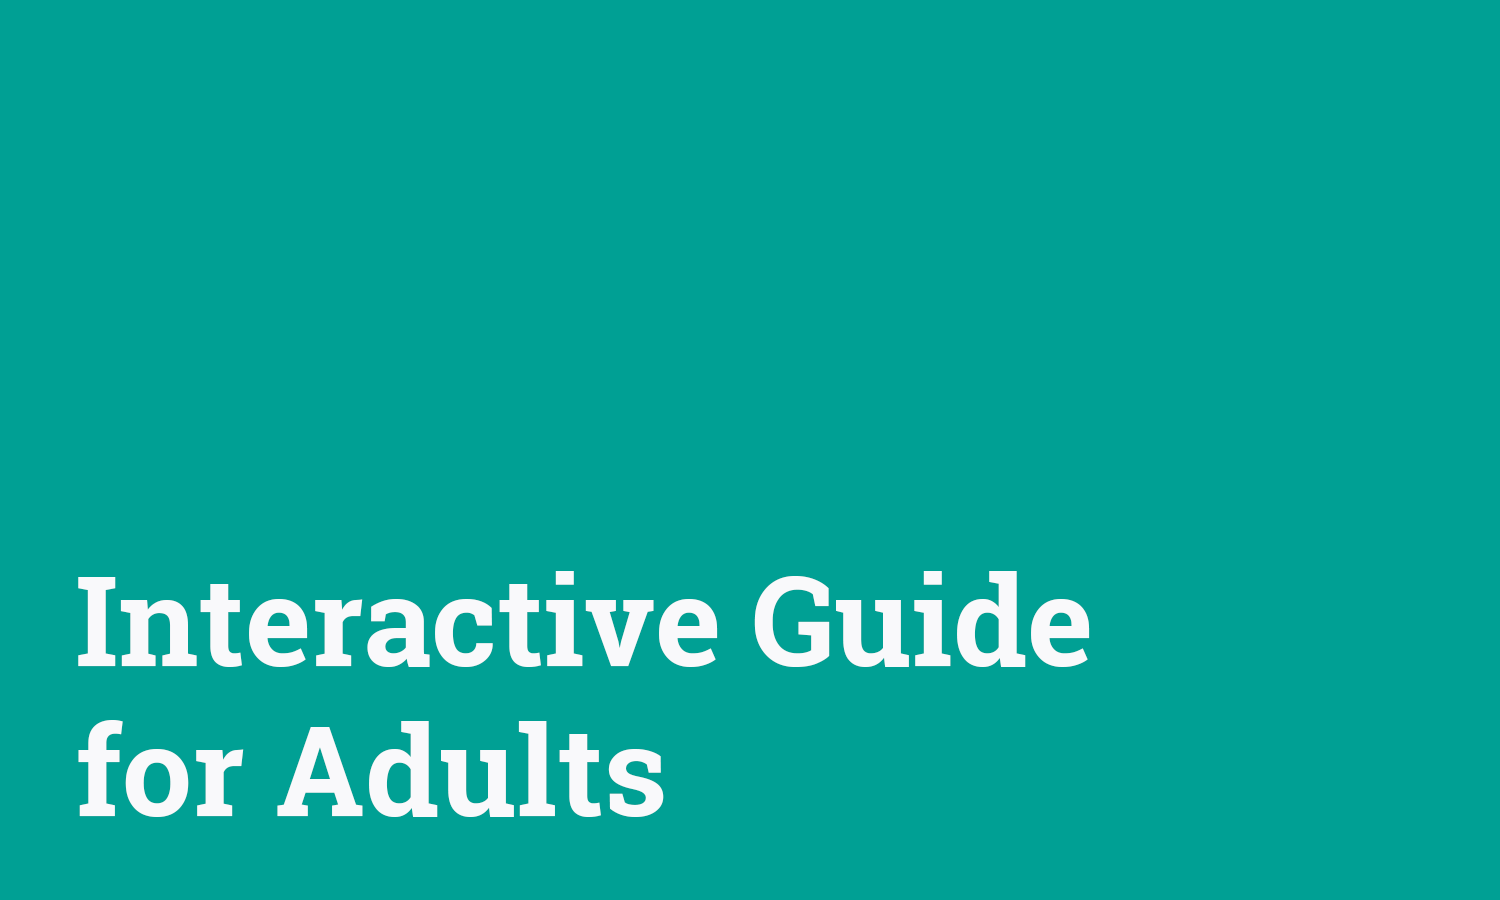 White text on teal background that reads "Interactive Guide for Adults"